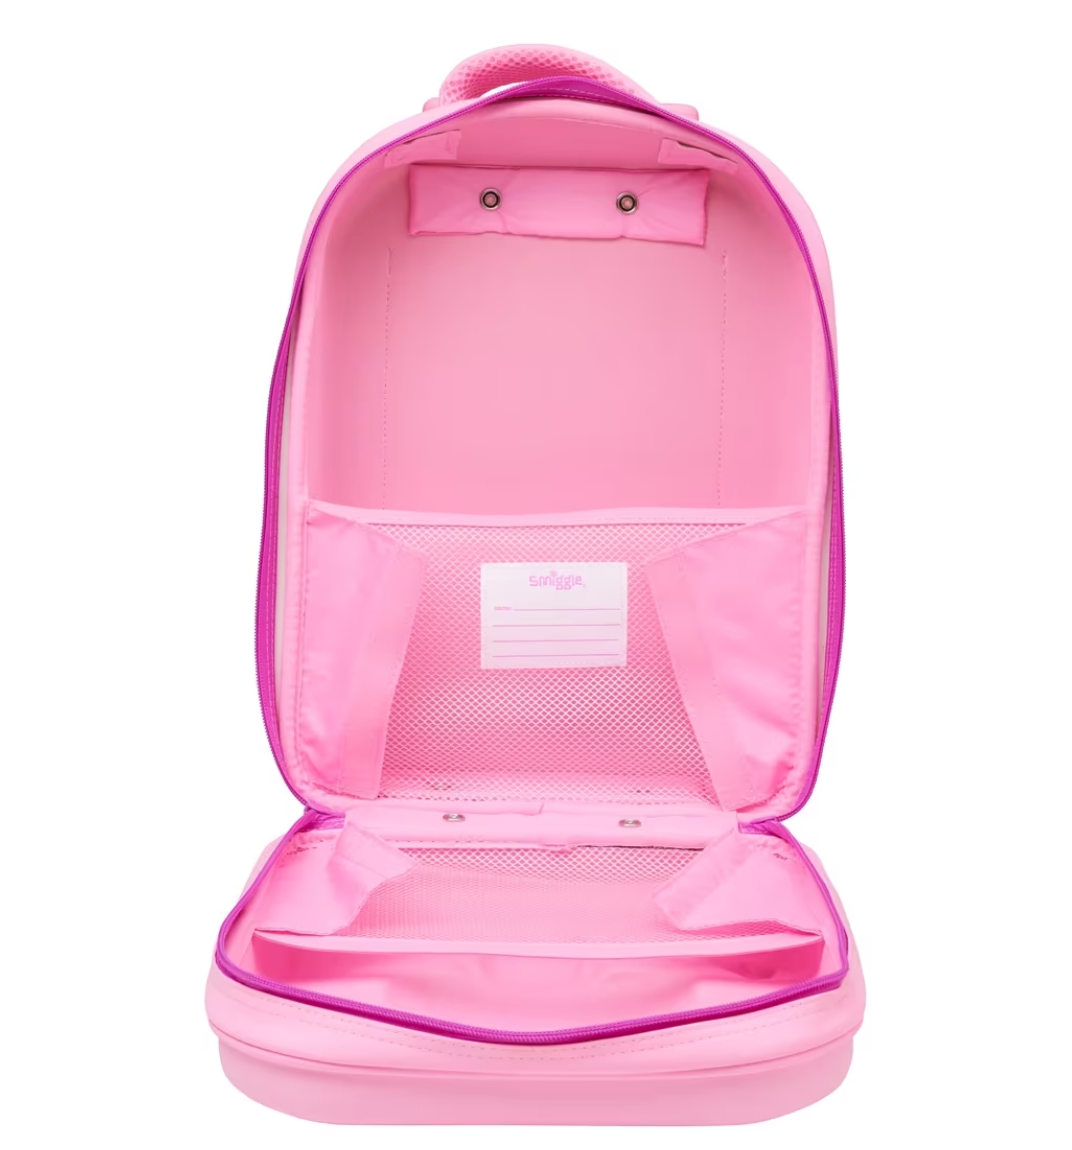 Smiggle Movin' Junior Trolley Bag With Hard Top - Pink